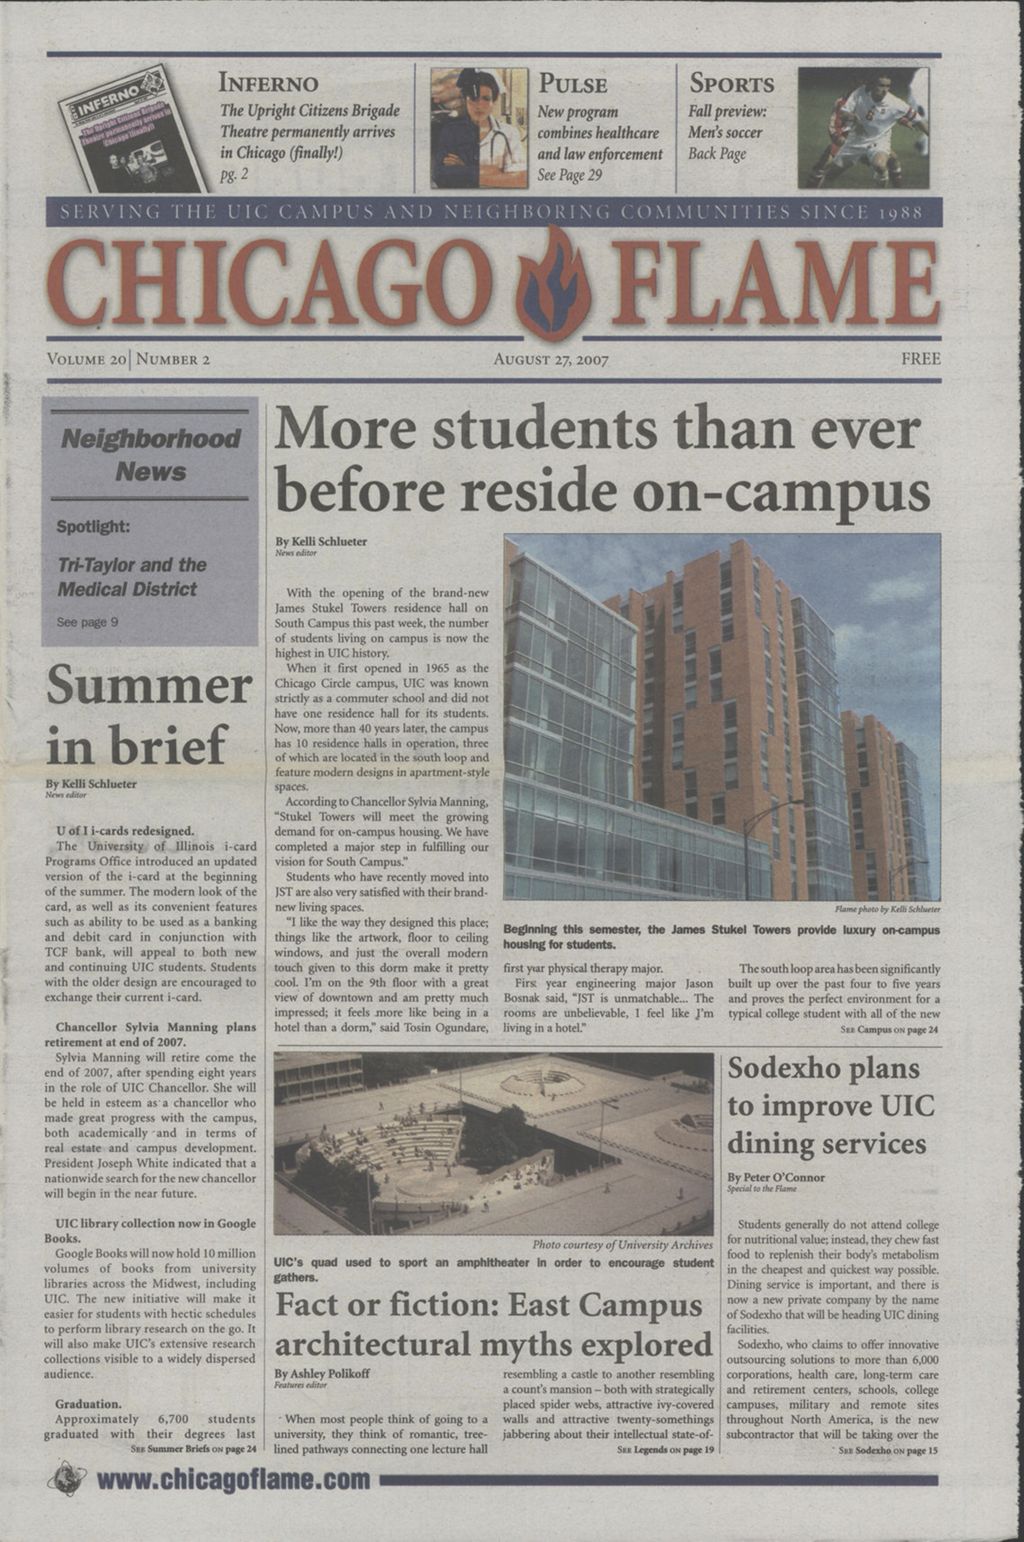 Miniature of Chicago Flame (August 27, 2007)